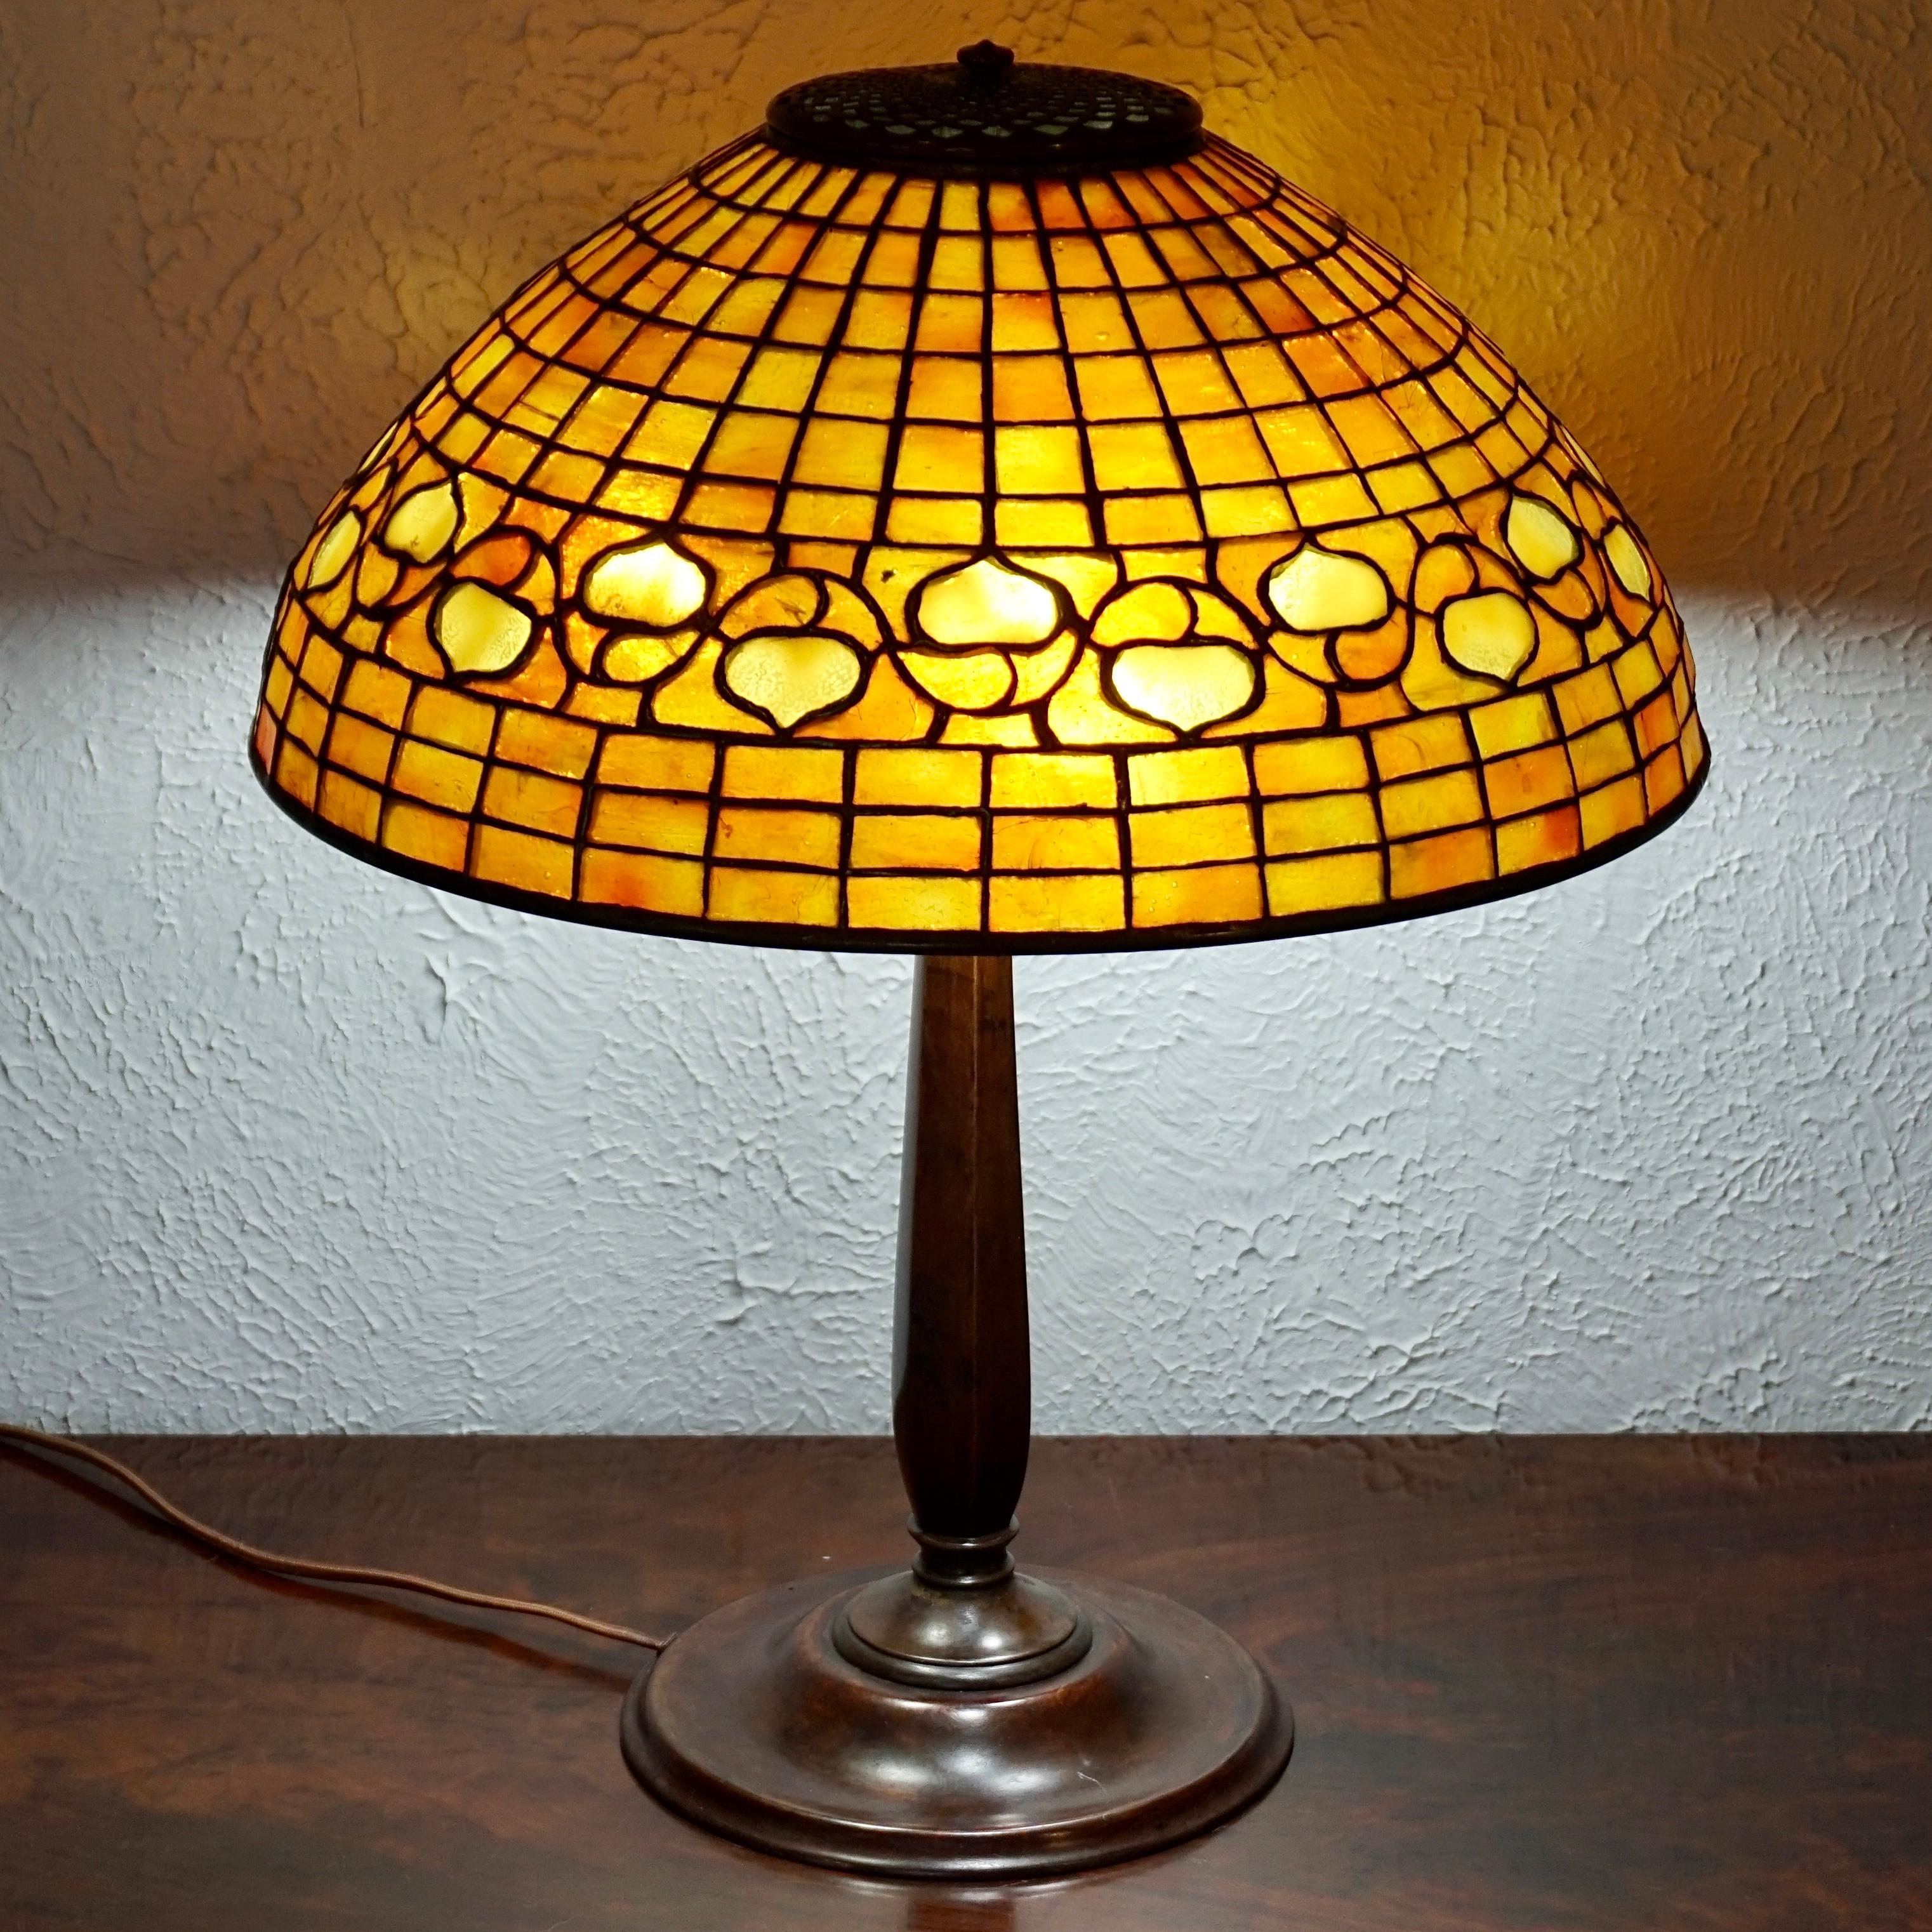 A warm and wonderful Art Nouveau Tiffany Studios table lamp, circa 1910

The stained glass Tiffany Studios shade emits vibrant orange and yellow glow from the monochromatic panels of glass. The pattered acorns with geometric surrounding glass sit